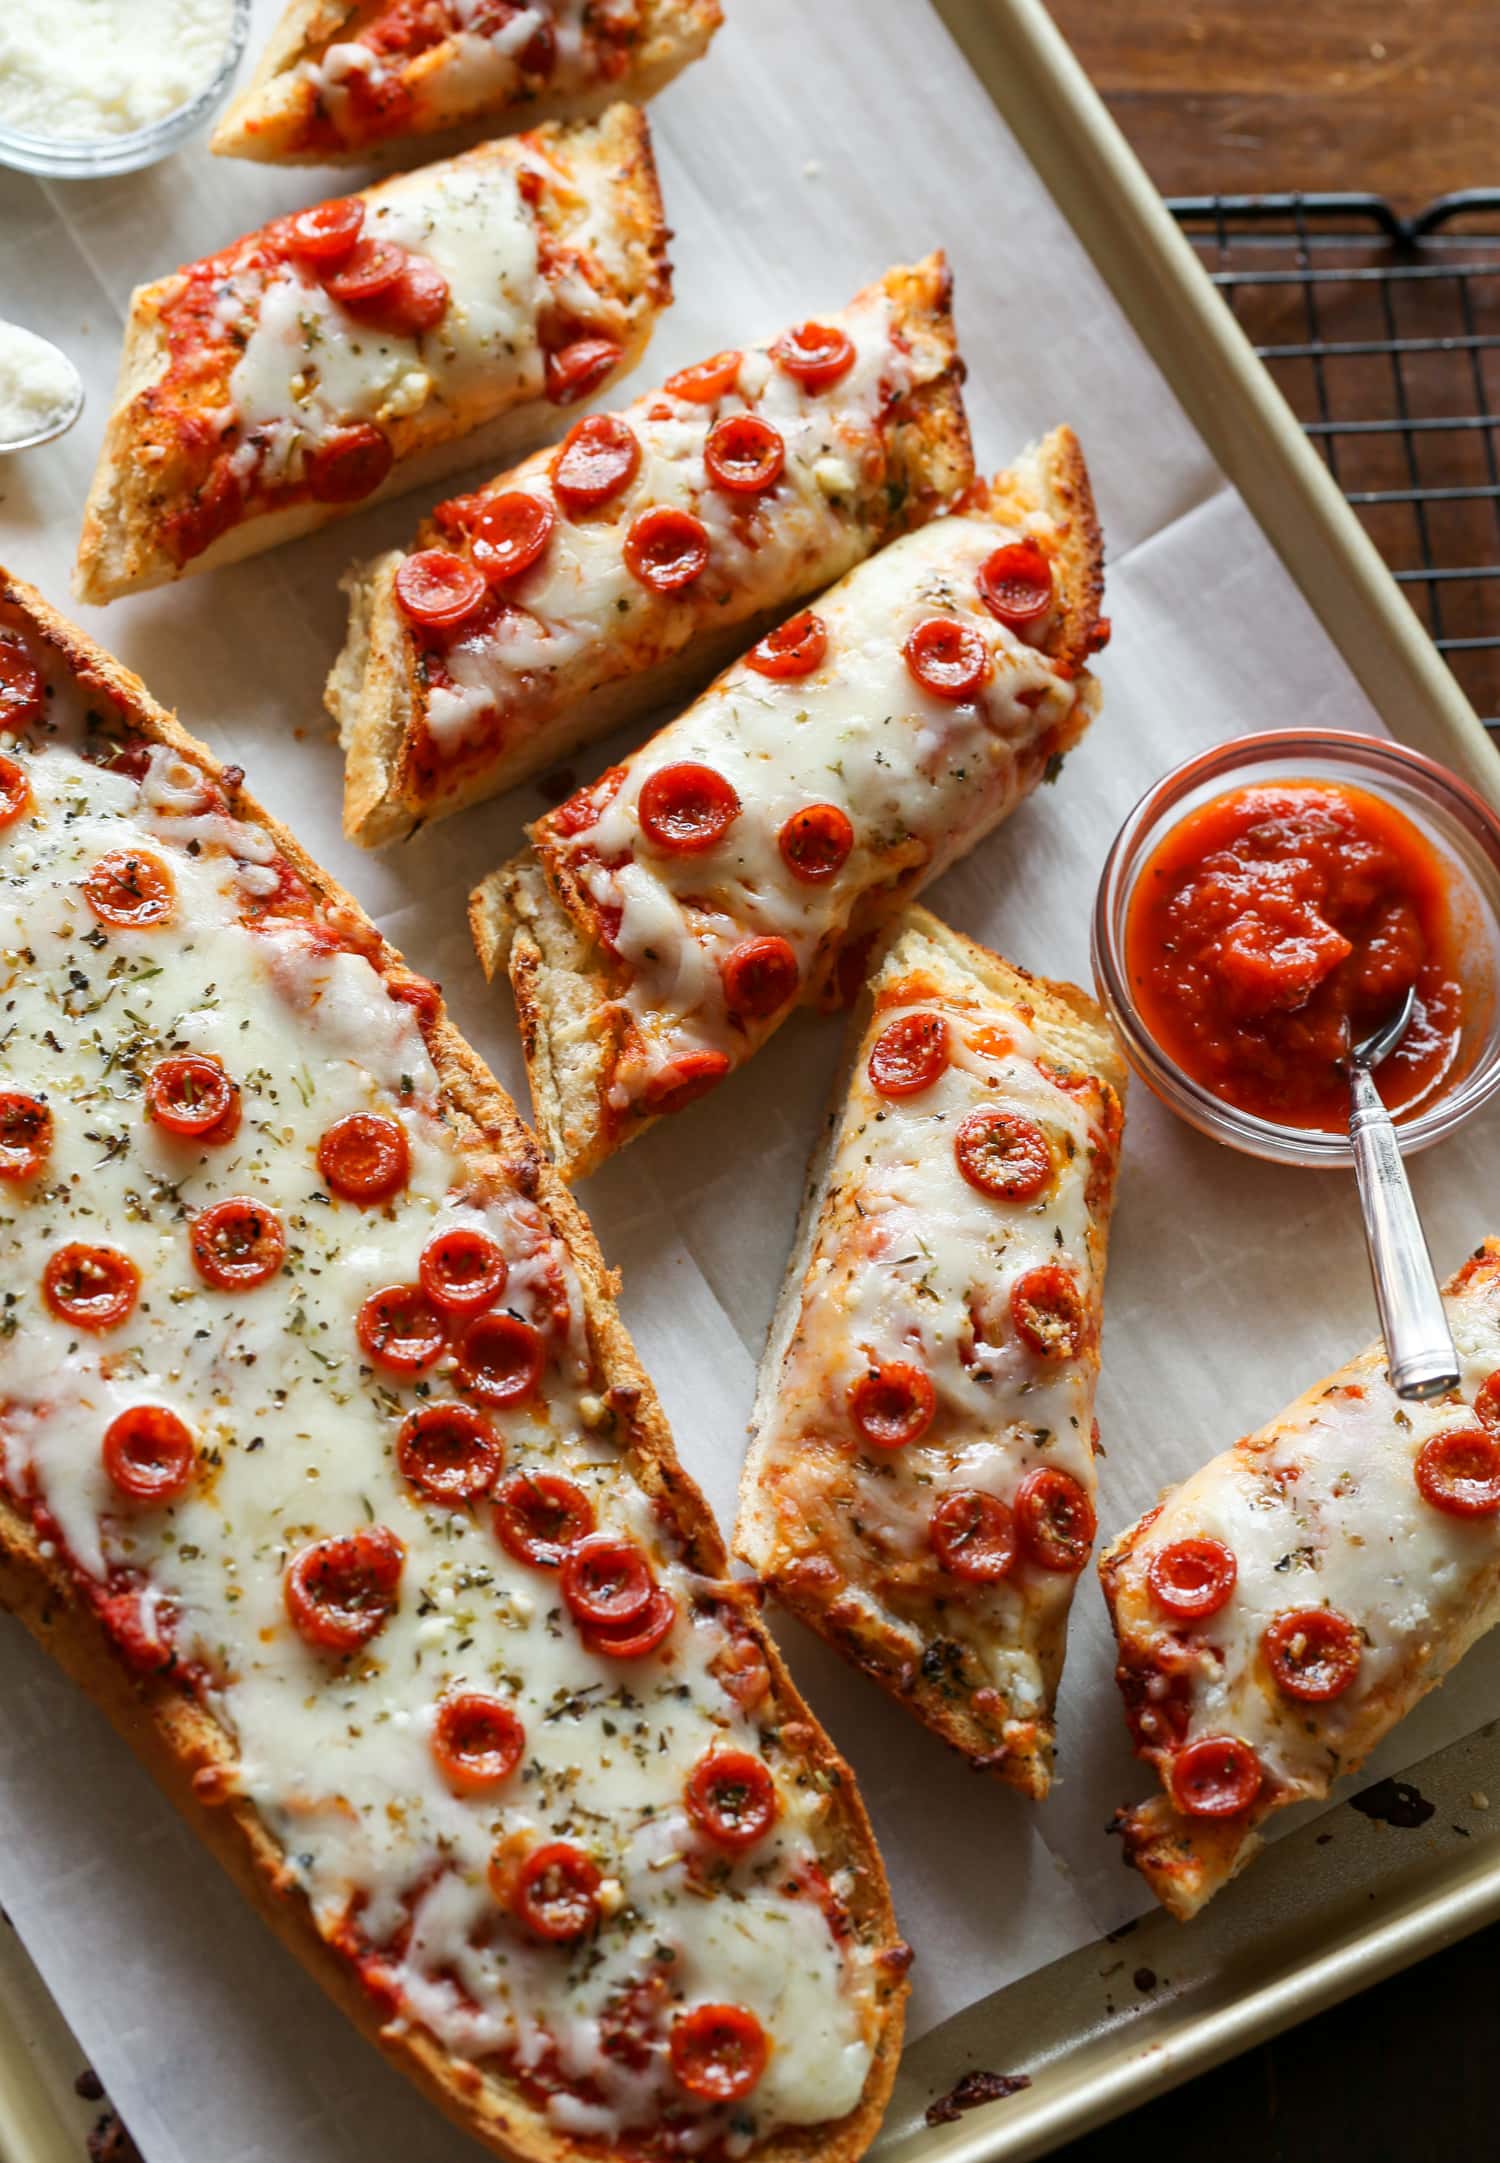 French bread pizza cut into individual slices on a platter, next to dipping sauces.